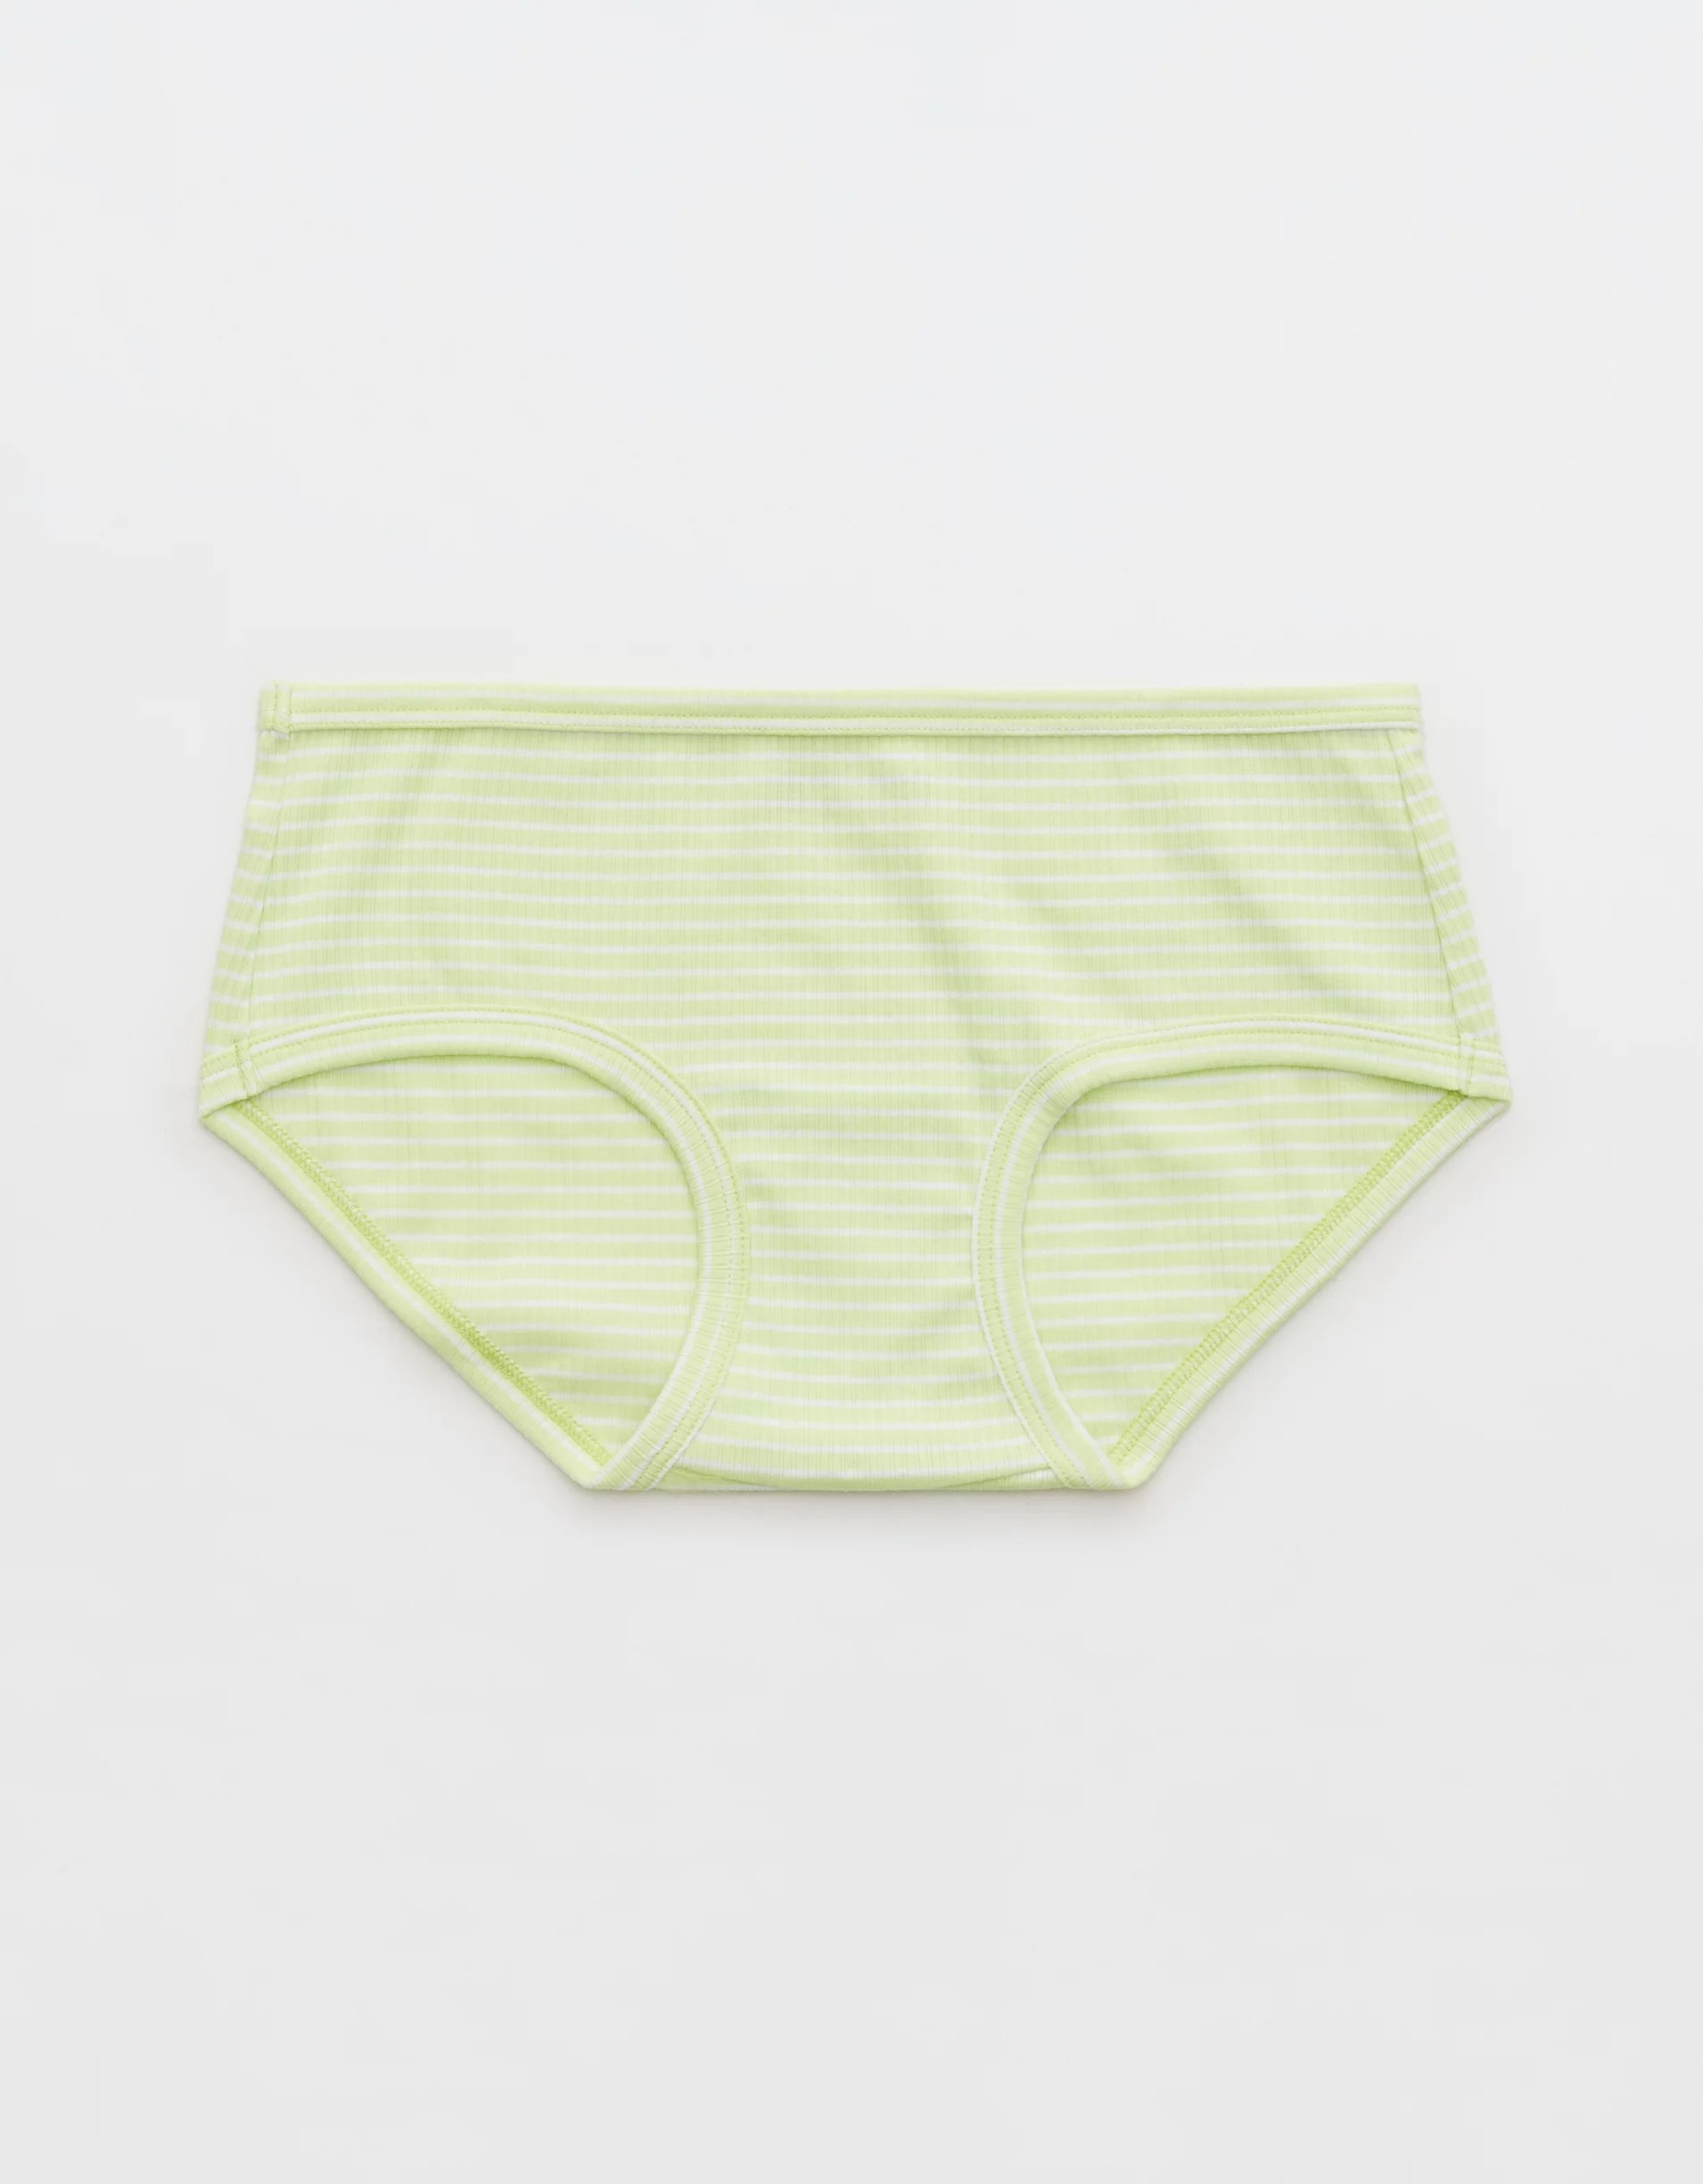 aerie ribbed boy briefs, a gynecologist approved underwear